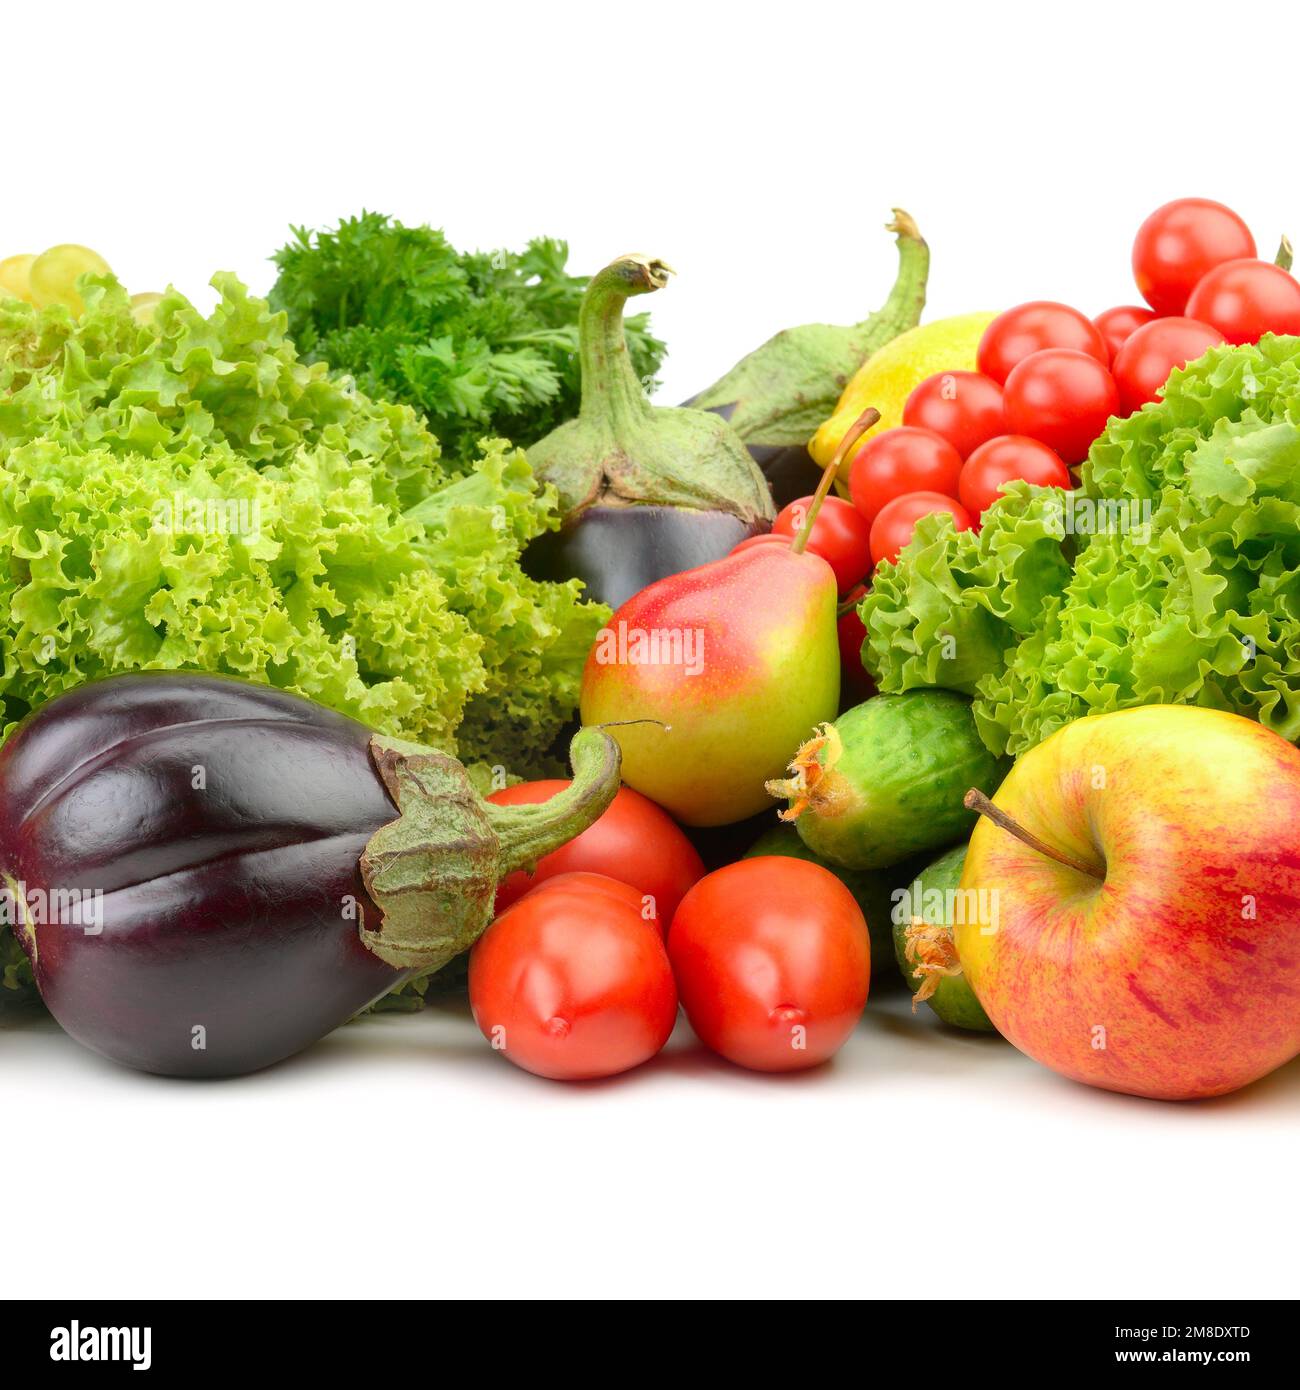 fruits and vegetables isolated on a white background Stock Photo